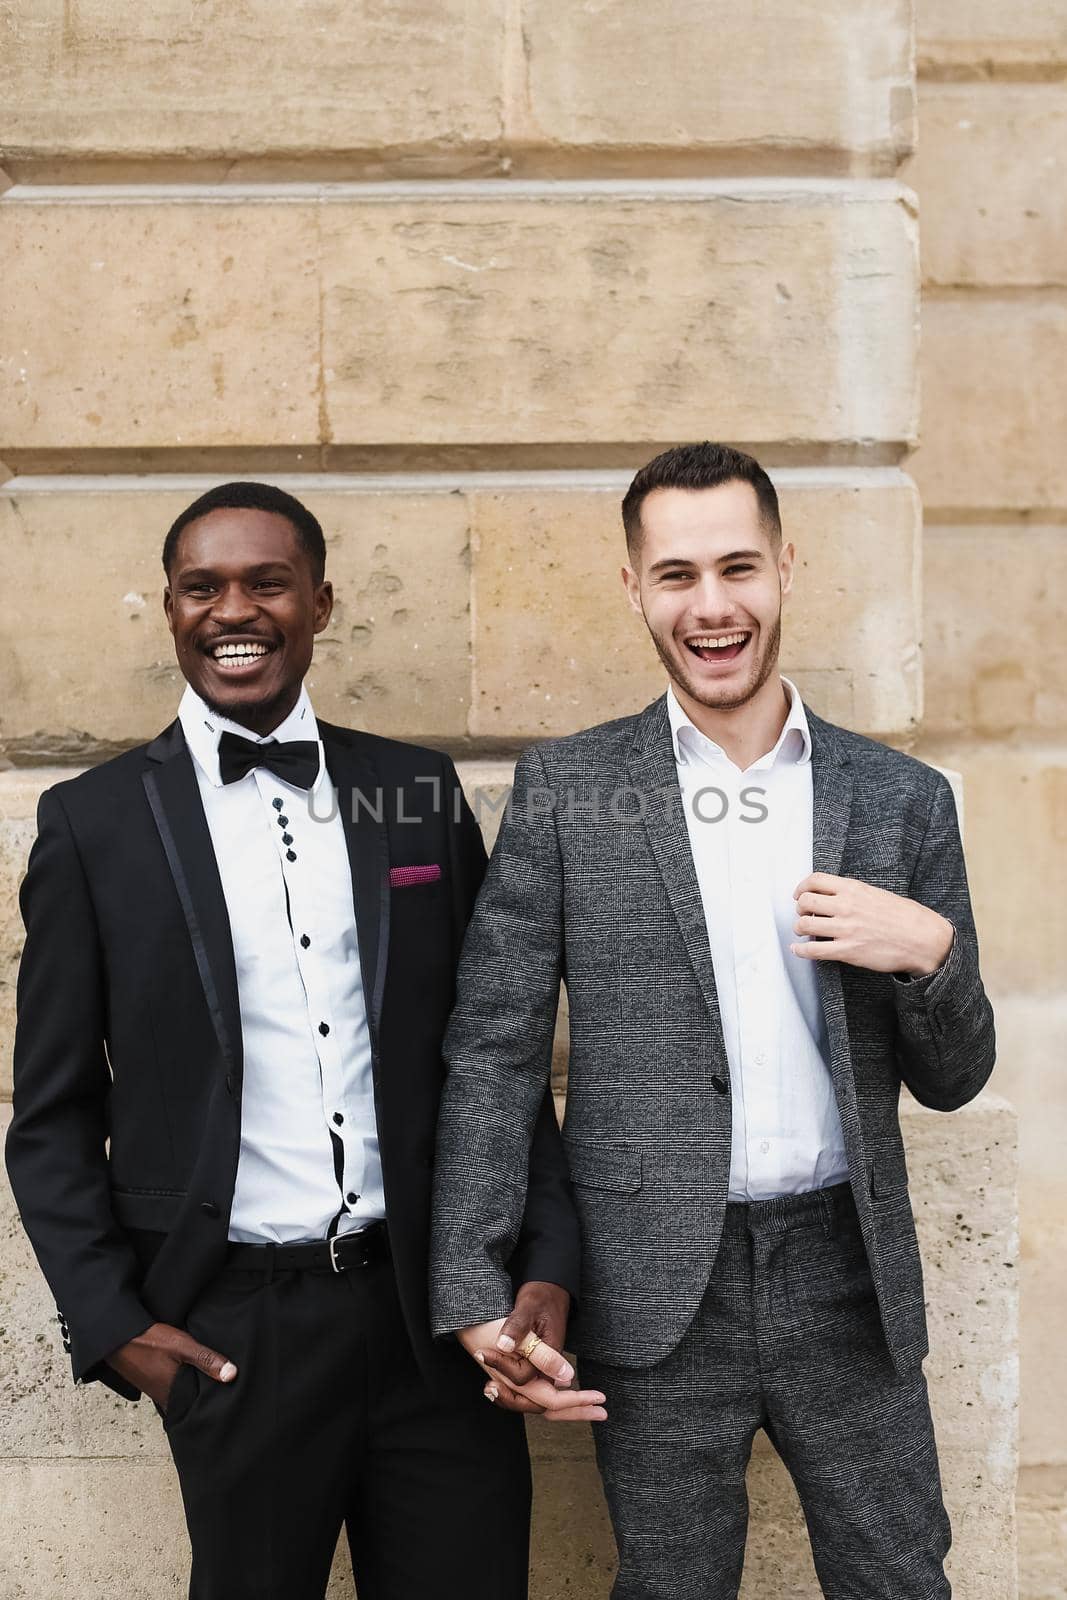 Afro american and european gays standing near building and wearing suits. Concept of lgbt and walking in city.